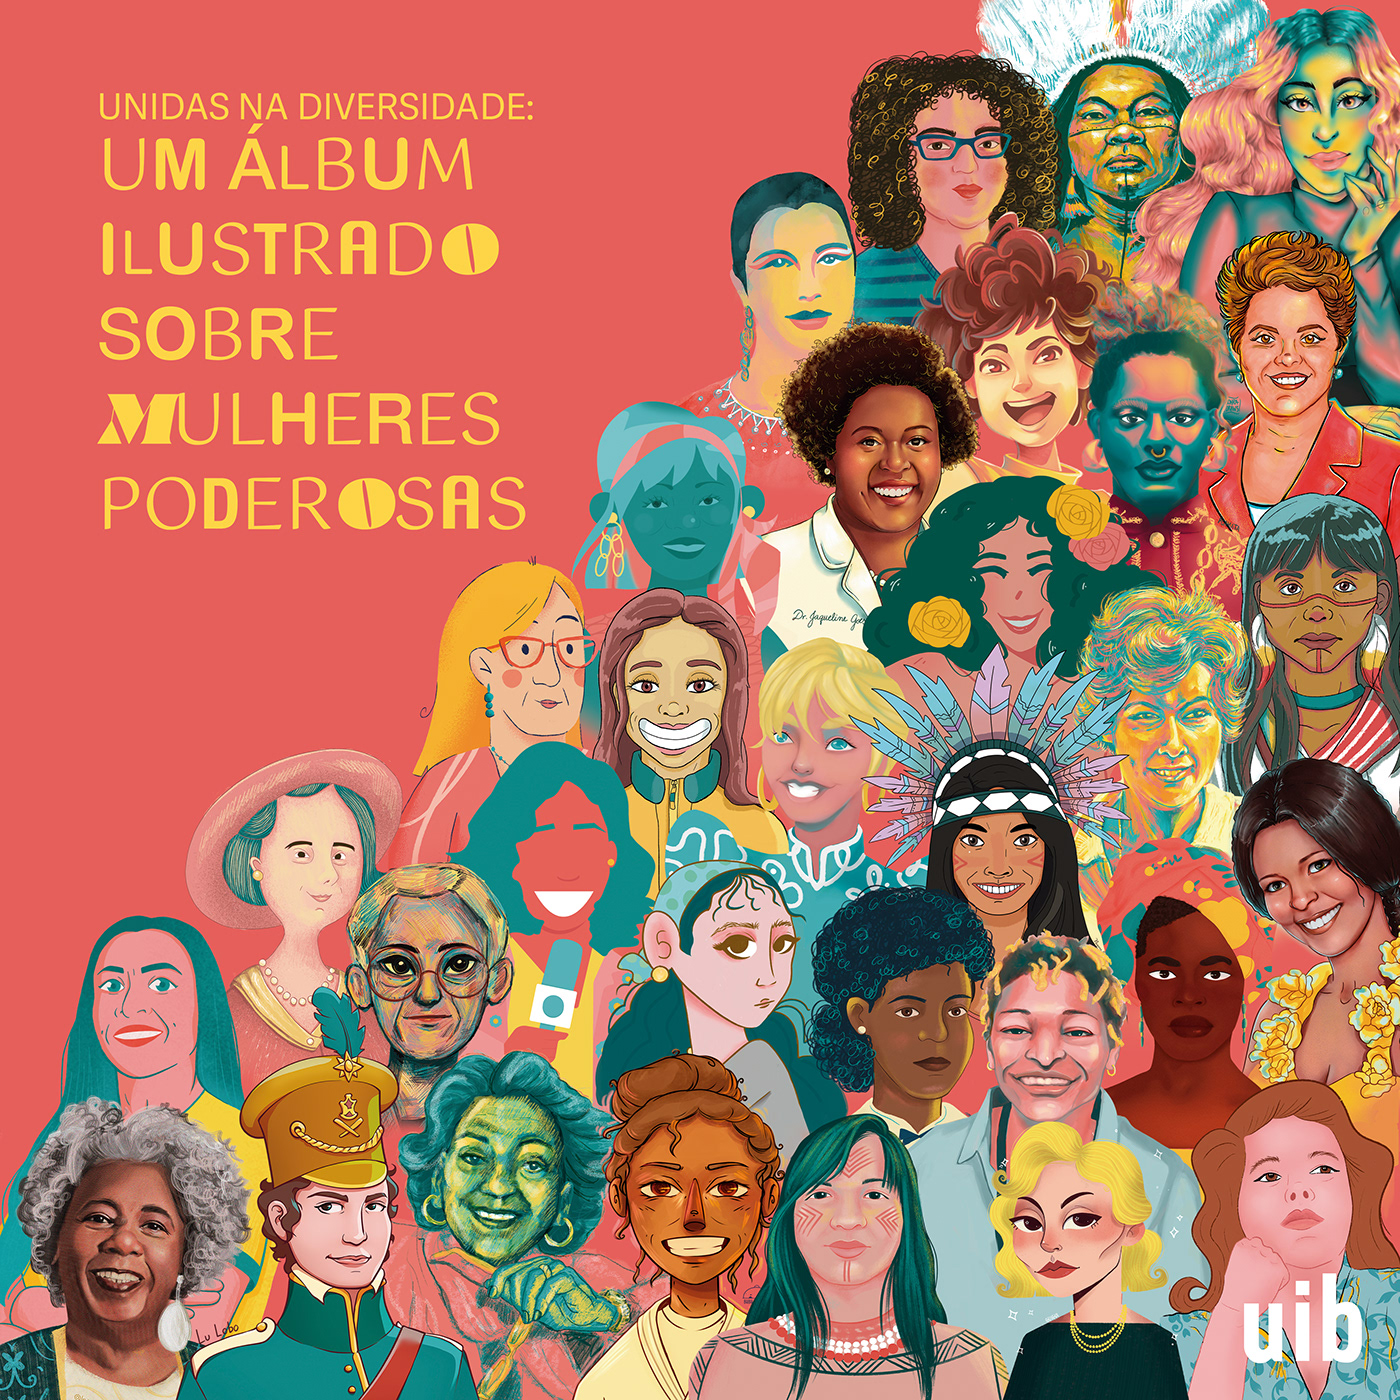 Sticker album book cover about women empowerment with many illustrated portraits in different styles